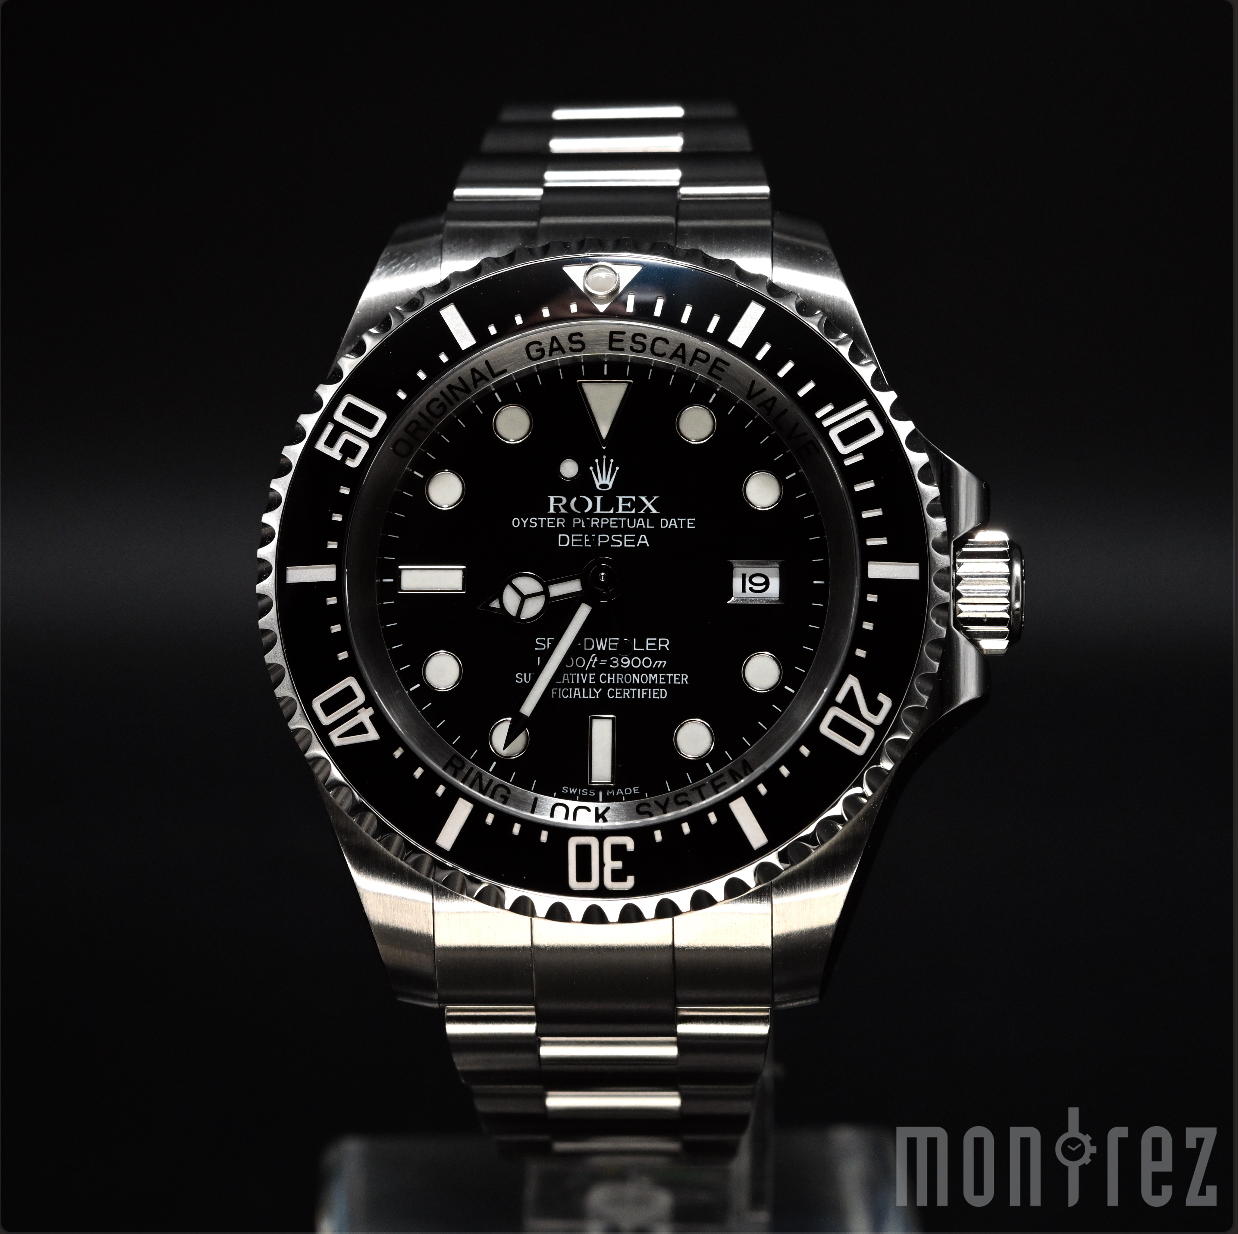 [Pre-Owned Watch] Rolex Deepsea 44mm 116660 Black Dial (Out of Production) (888)